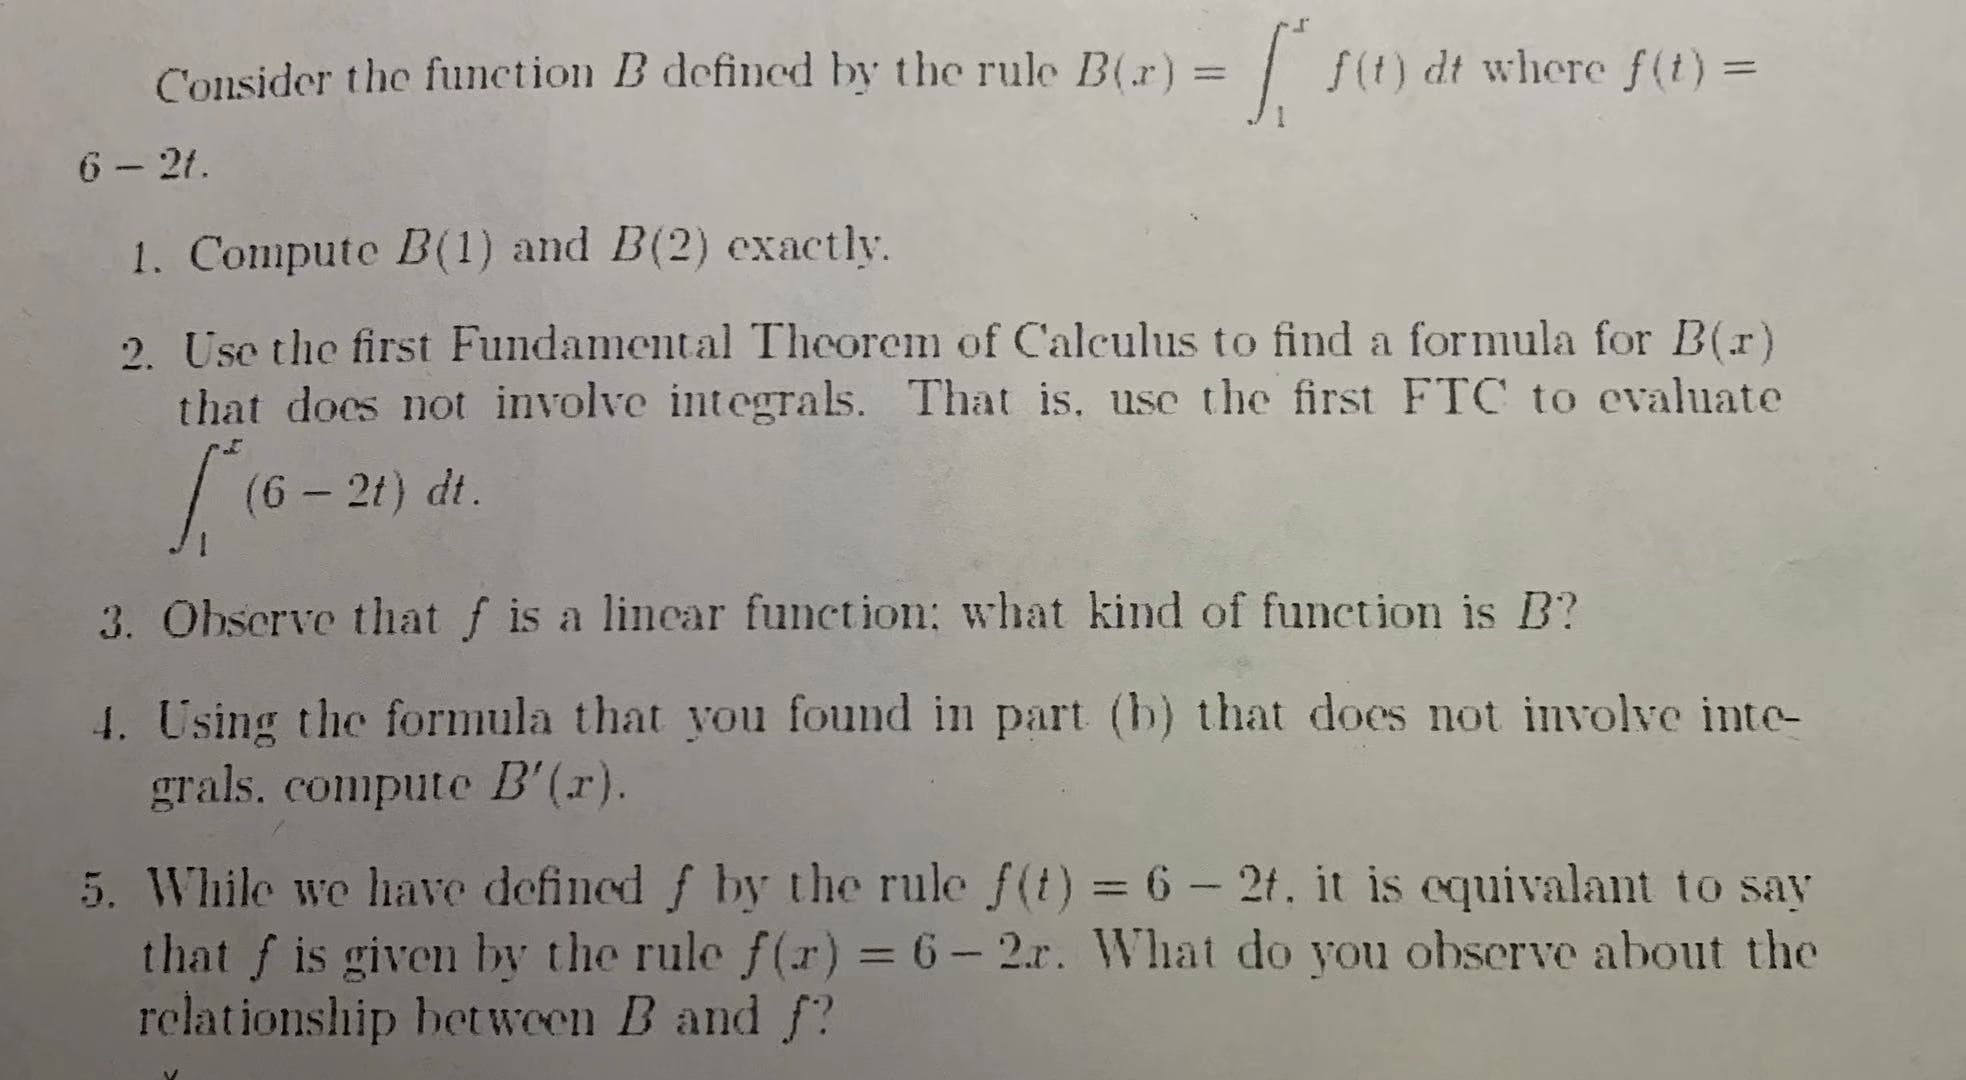 f(t) dt where f(t)=
Consider the function B defined by the rule B(r)
11
6-2t.
1. Compute B(1) and B(2) exactly
2. Use the first Fundamental Theorem of Calculus to find a formula for B(r)
that does not involve integrals. That is, use the first FTC to evaluate
(G-21) dt.
3. Ohserve that f is a linear function: what kind of function is B?
4. Using the formula that you found in part (b) that does not involve inte-
grals. compute B' (r).
5. While we have defined f by the rule f(t) 6- 2f., it is equivalant to say
that fis given by the rule f(r) = 6-2.r. What do you observe about the
relationship between B and f?
